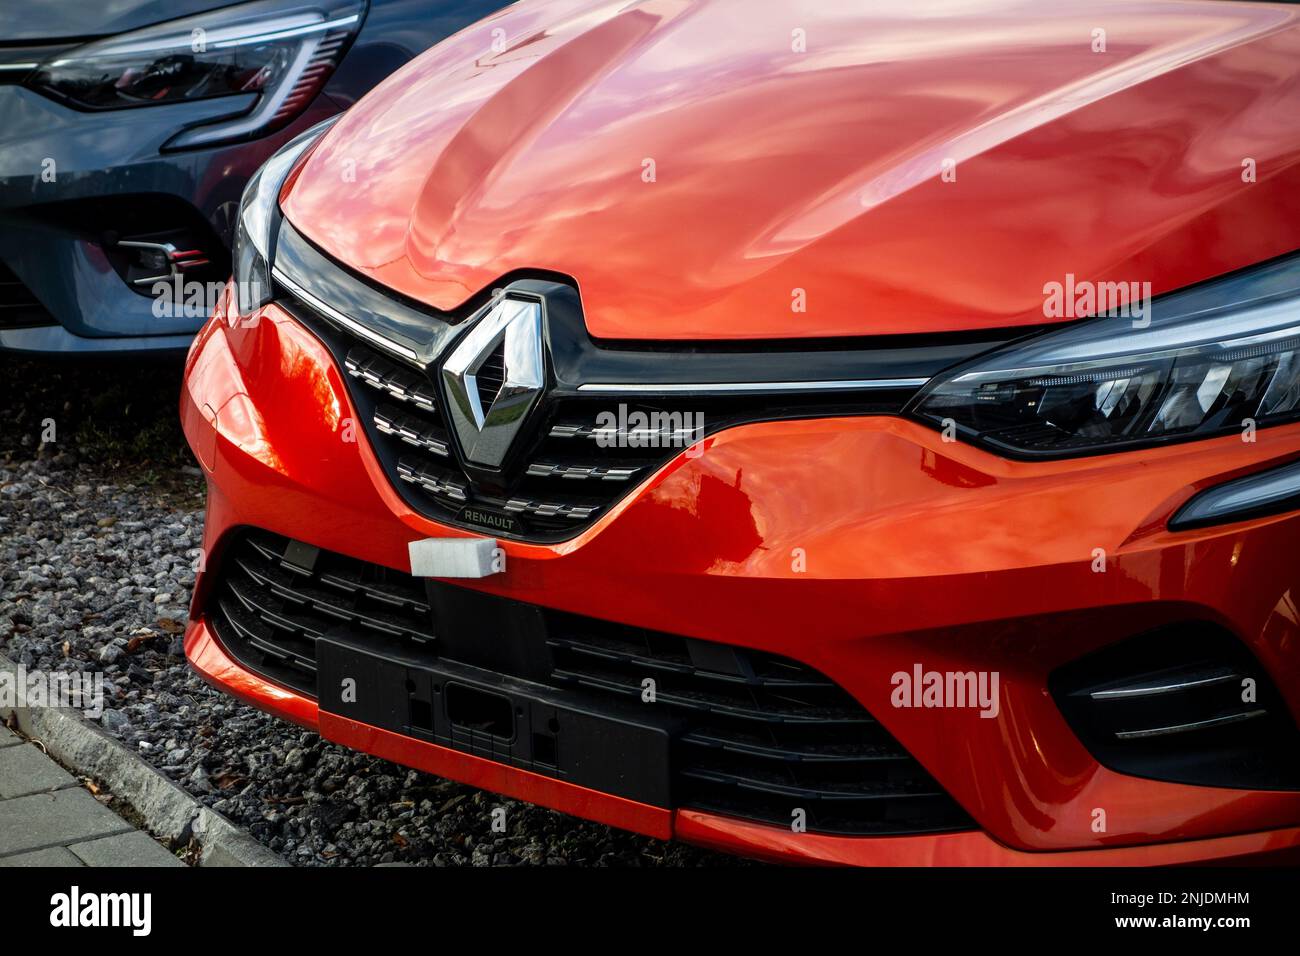 OSTRAVA, CZECH REPUBLIC - FEBRUARY 22, 2023: Frontal part of brand new red Renault Clio hatchback at dealership Stock Photo